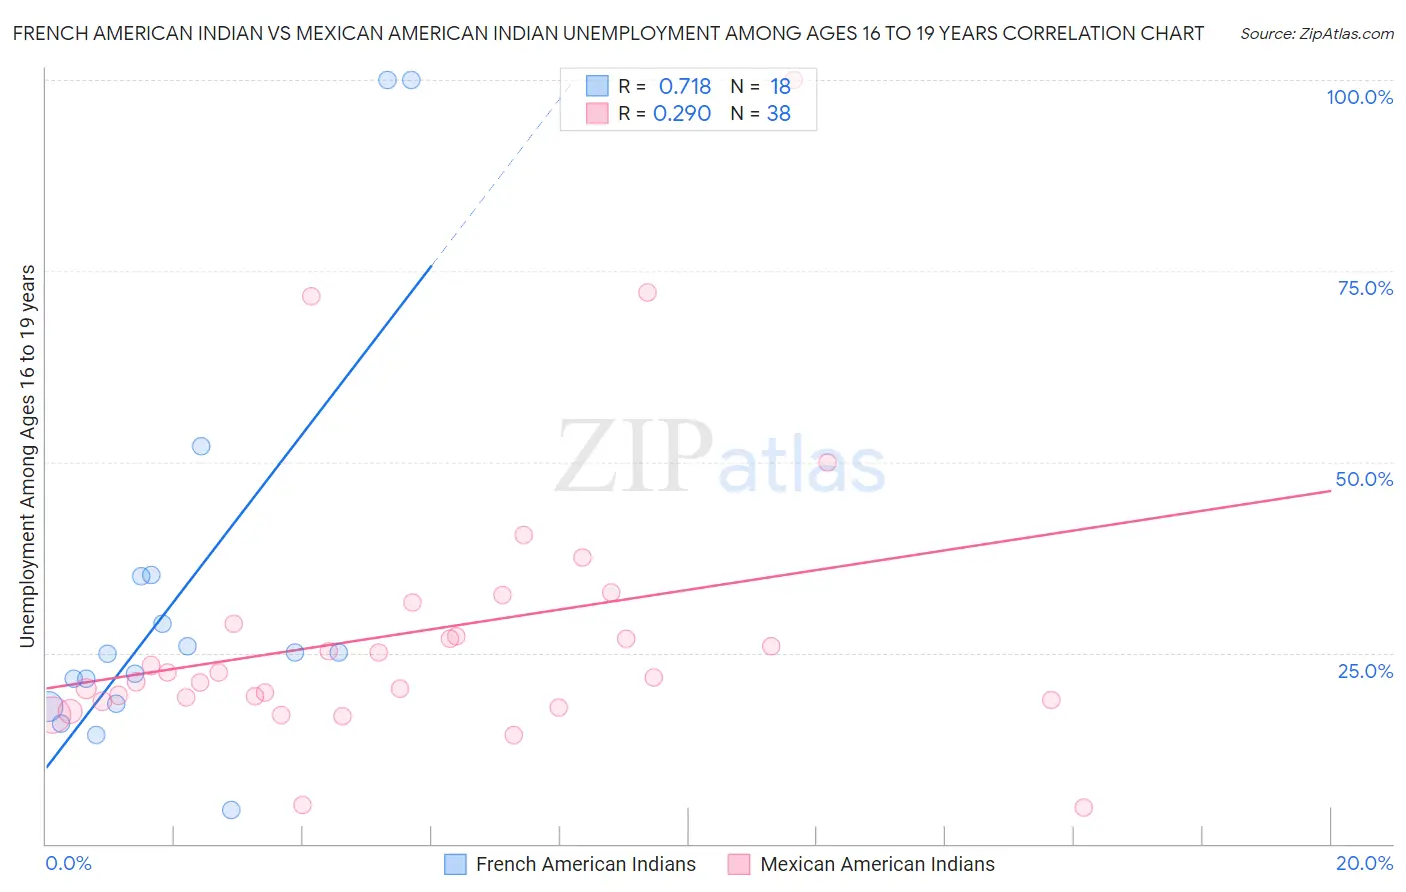 French American Indian vs Mexican American Indian Unemployment Among Ages 16 to 19 years